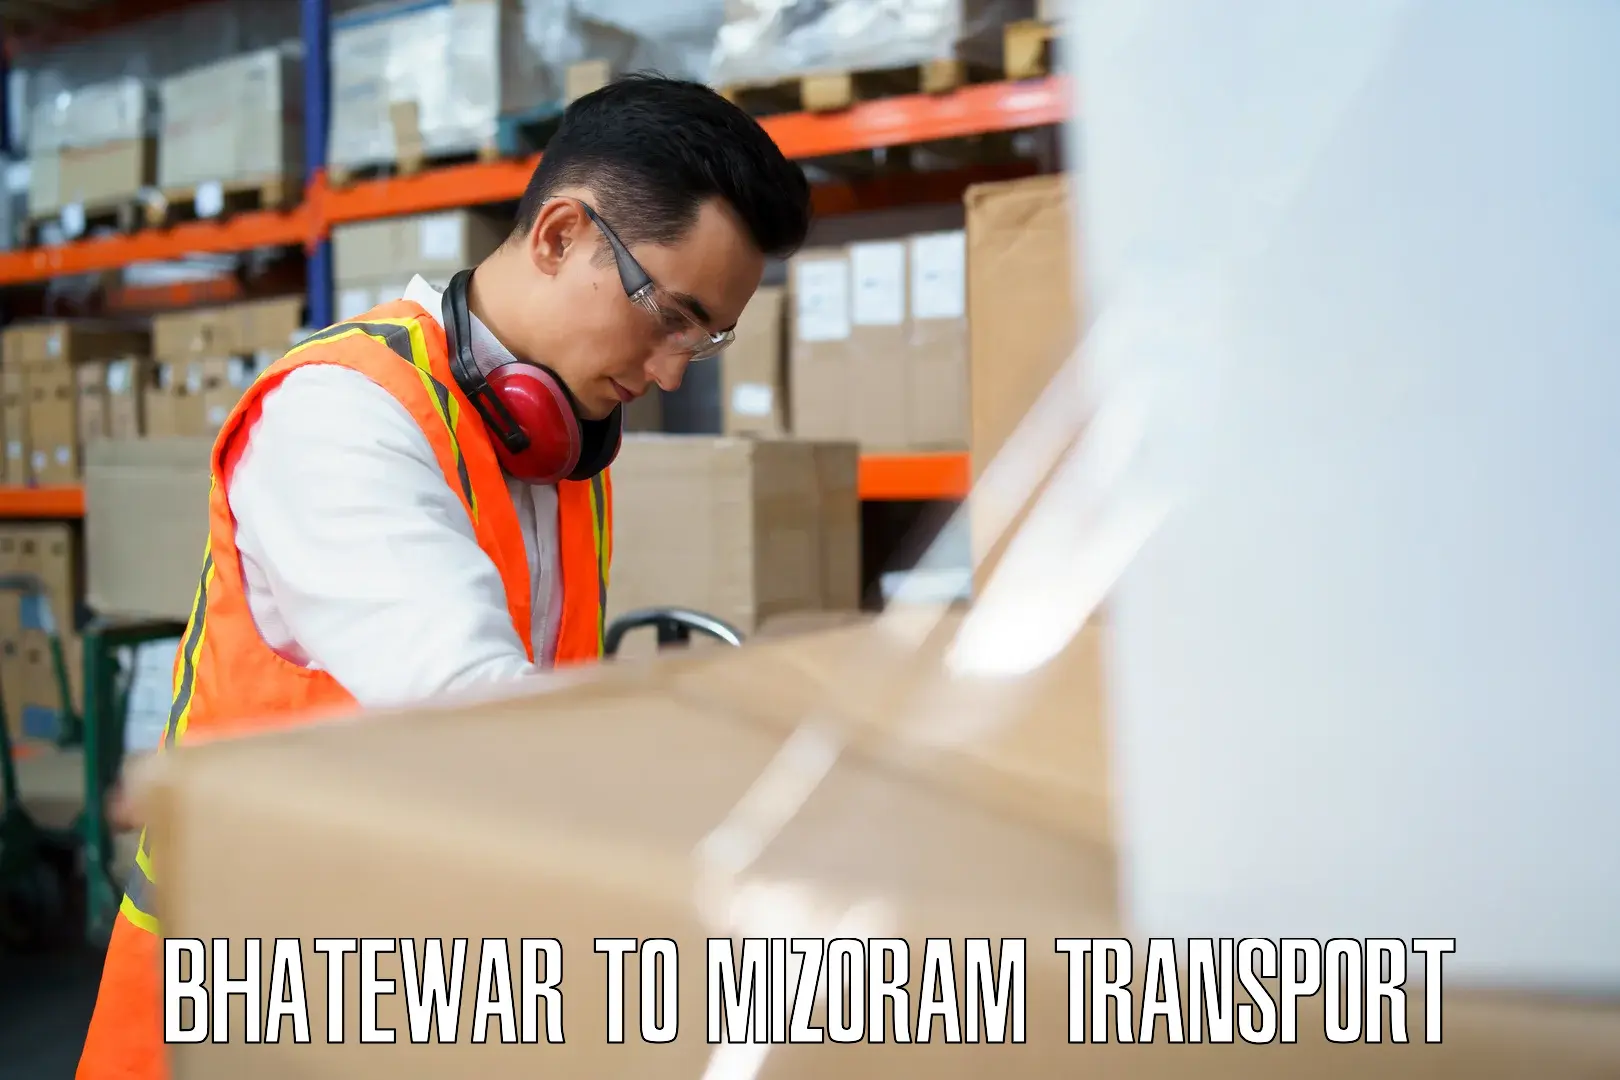 Daily parcel service transport Bhatewar to Aizawl